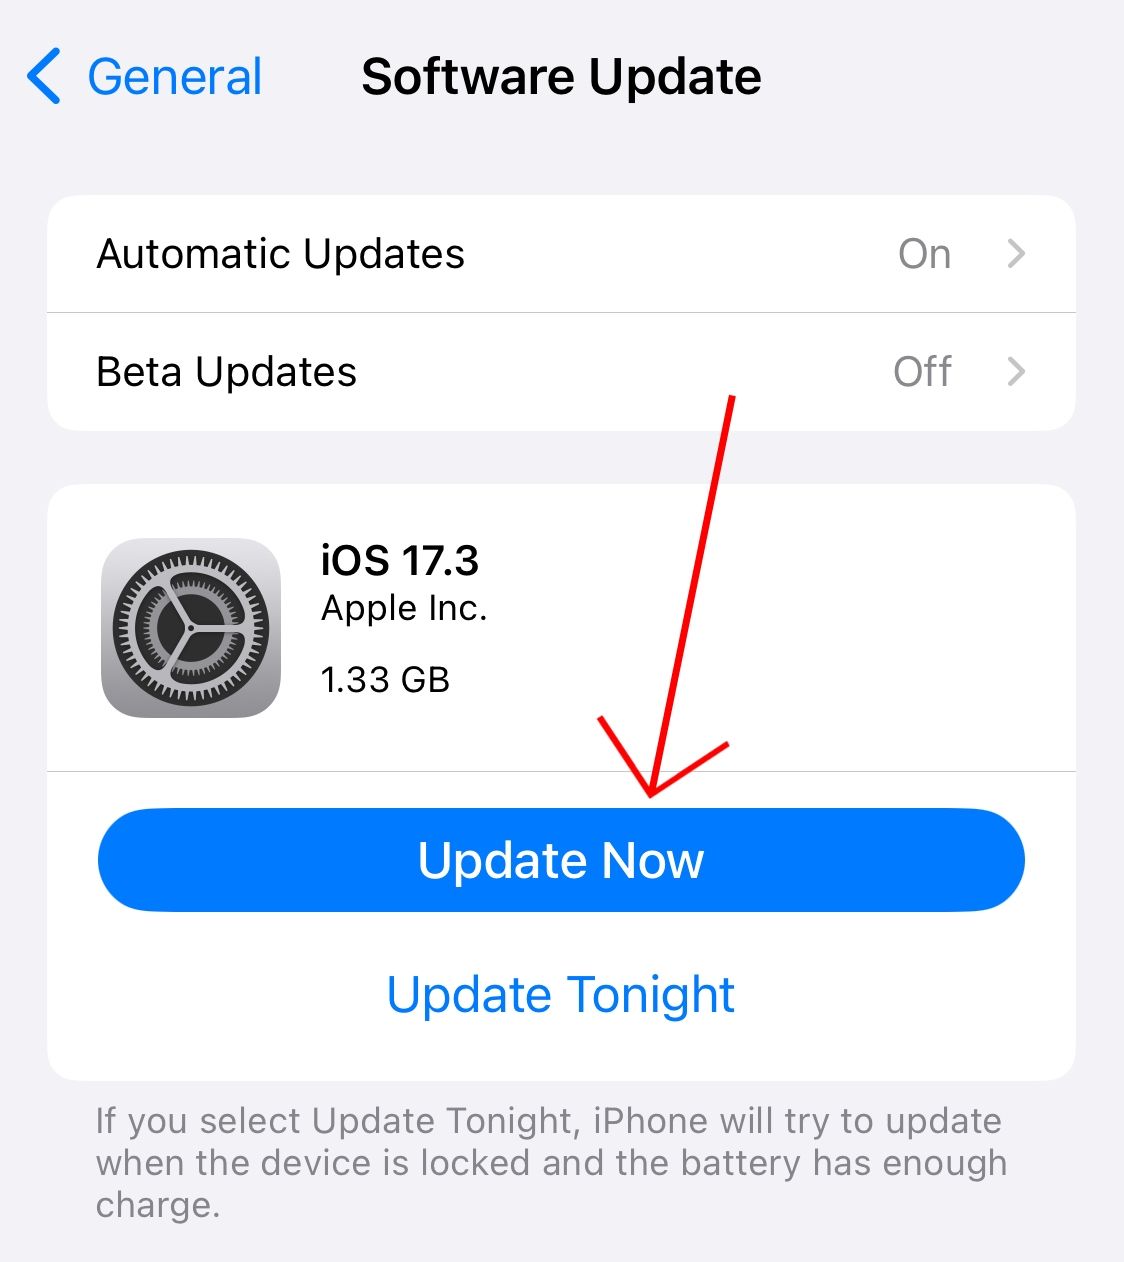 Select 'Update Now' under iPhone software update.